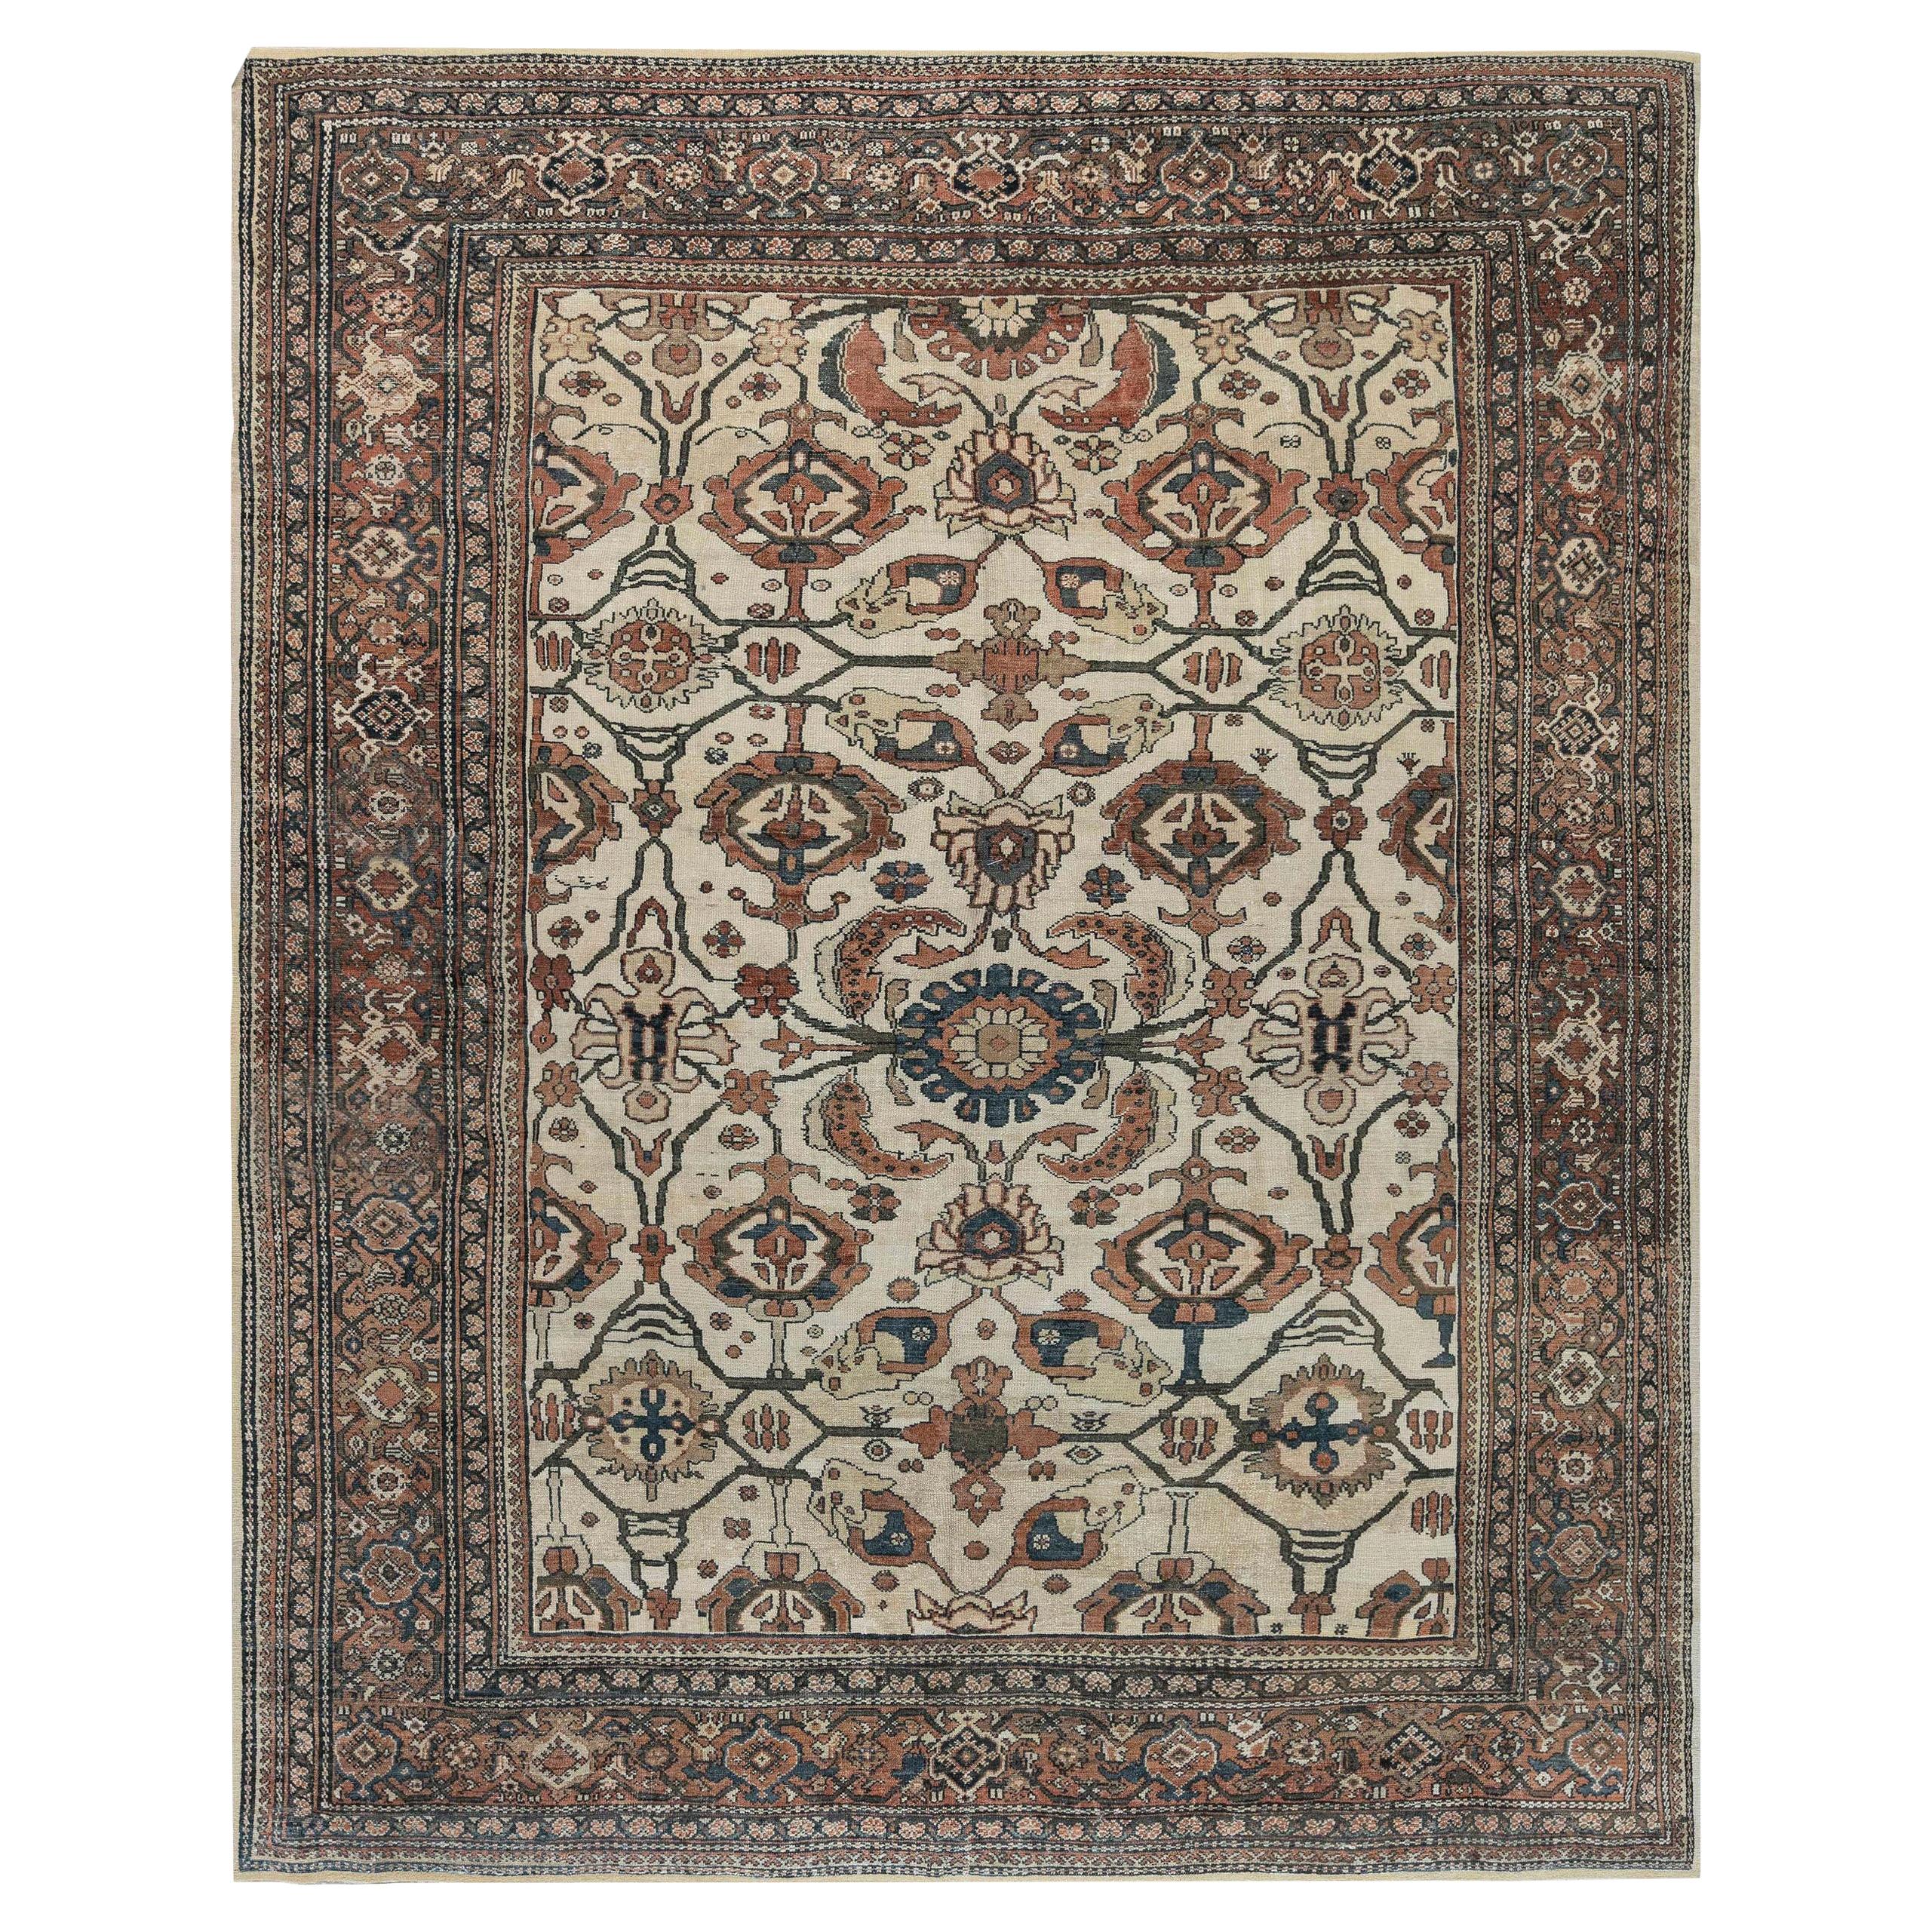 Antique Botanic Persian Sultanabad Wool Carpet For Sale